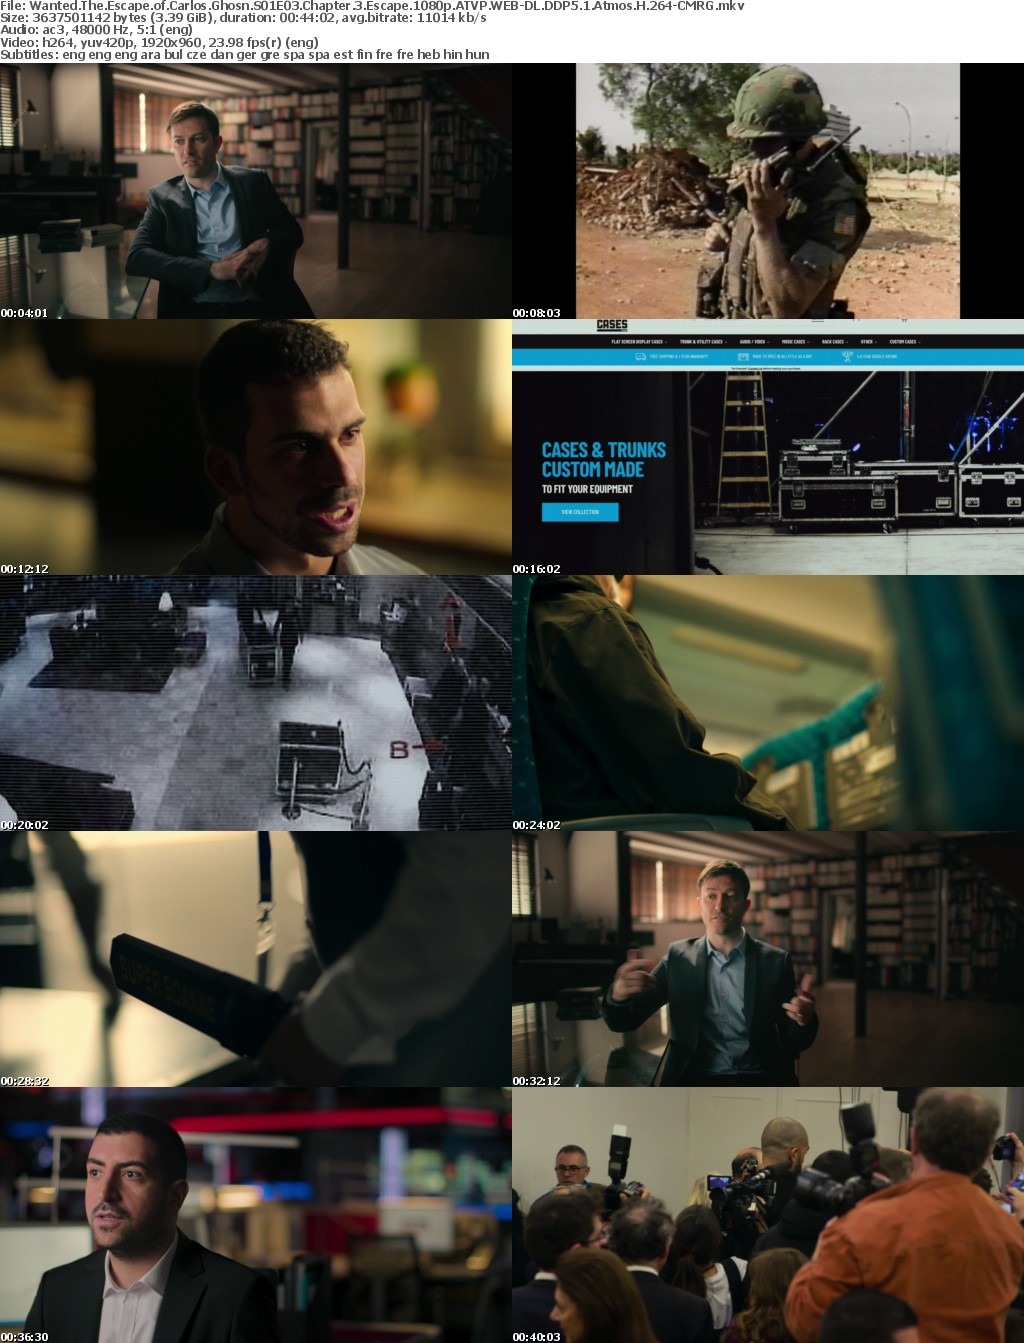 Wanted The Escape of Carlos Ghosn S01E03 Chapter 3 Escape 1080p ATVP WEB-DL DDP5 1 Atmos H 264-CMRG